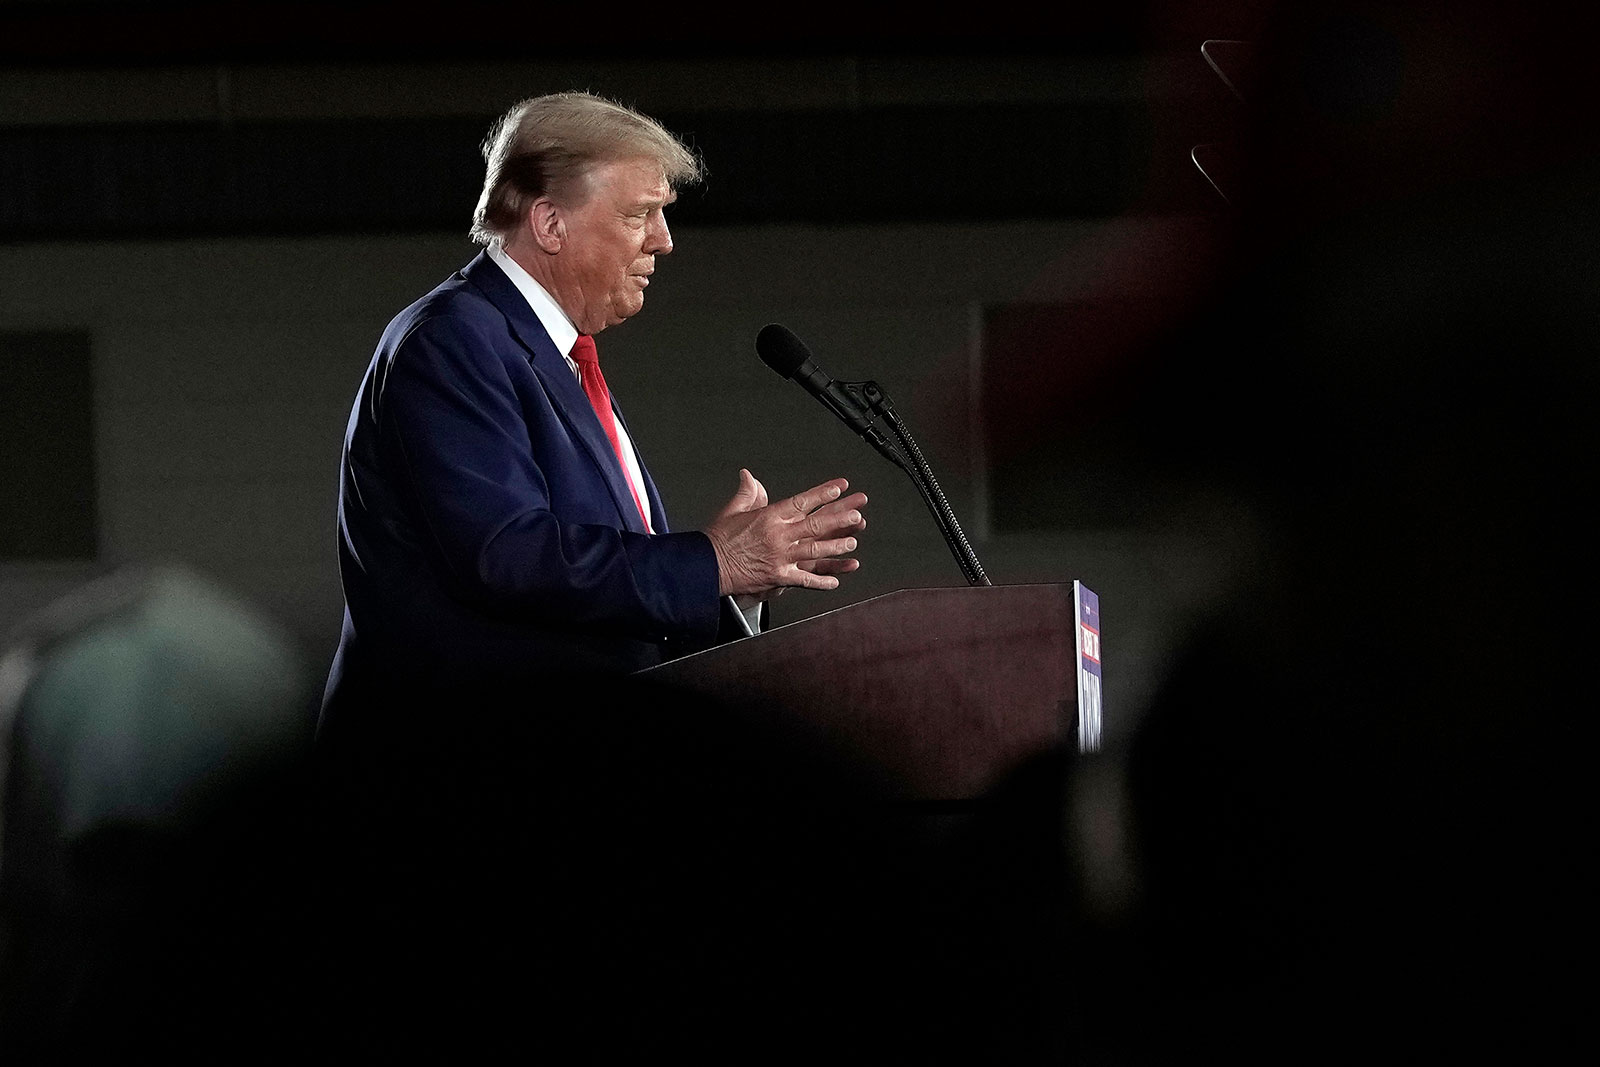 Republican presidential candidate former President Donald Trump speaks at a campaign rally on Wednesday, May 1, at the Waukesha County Expo Center in Waukesha, Wisconsin.